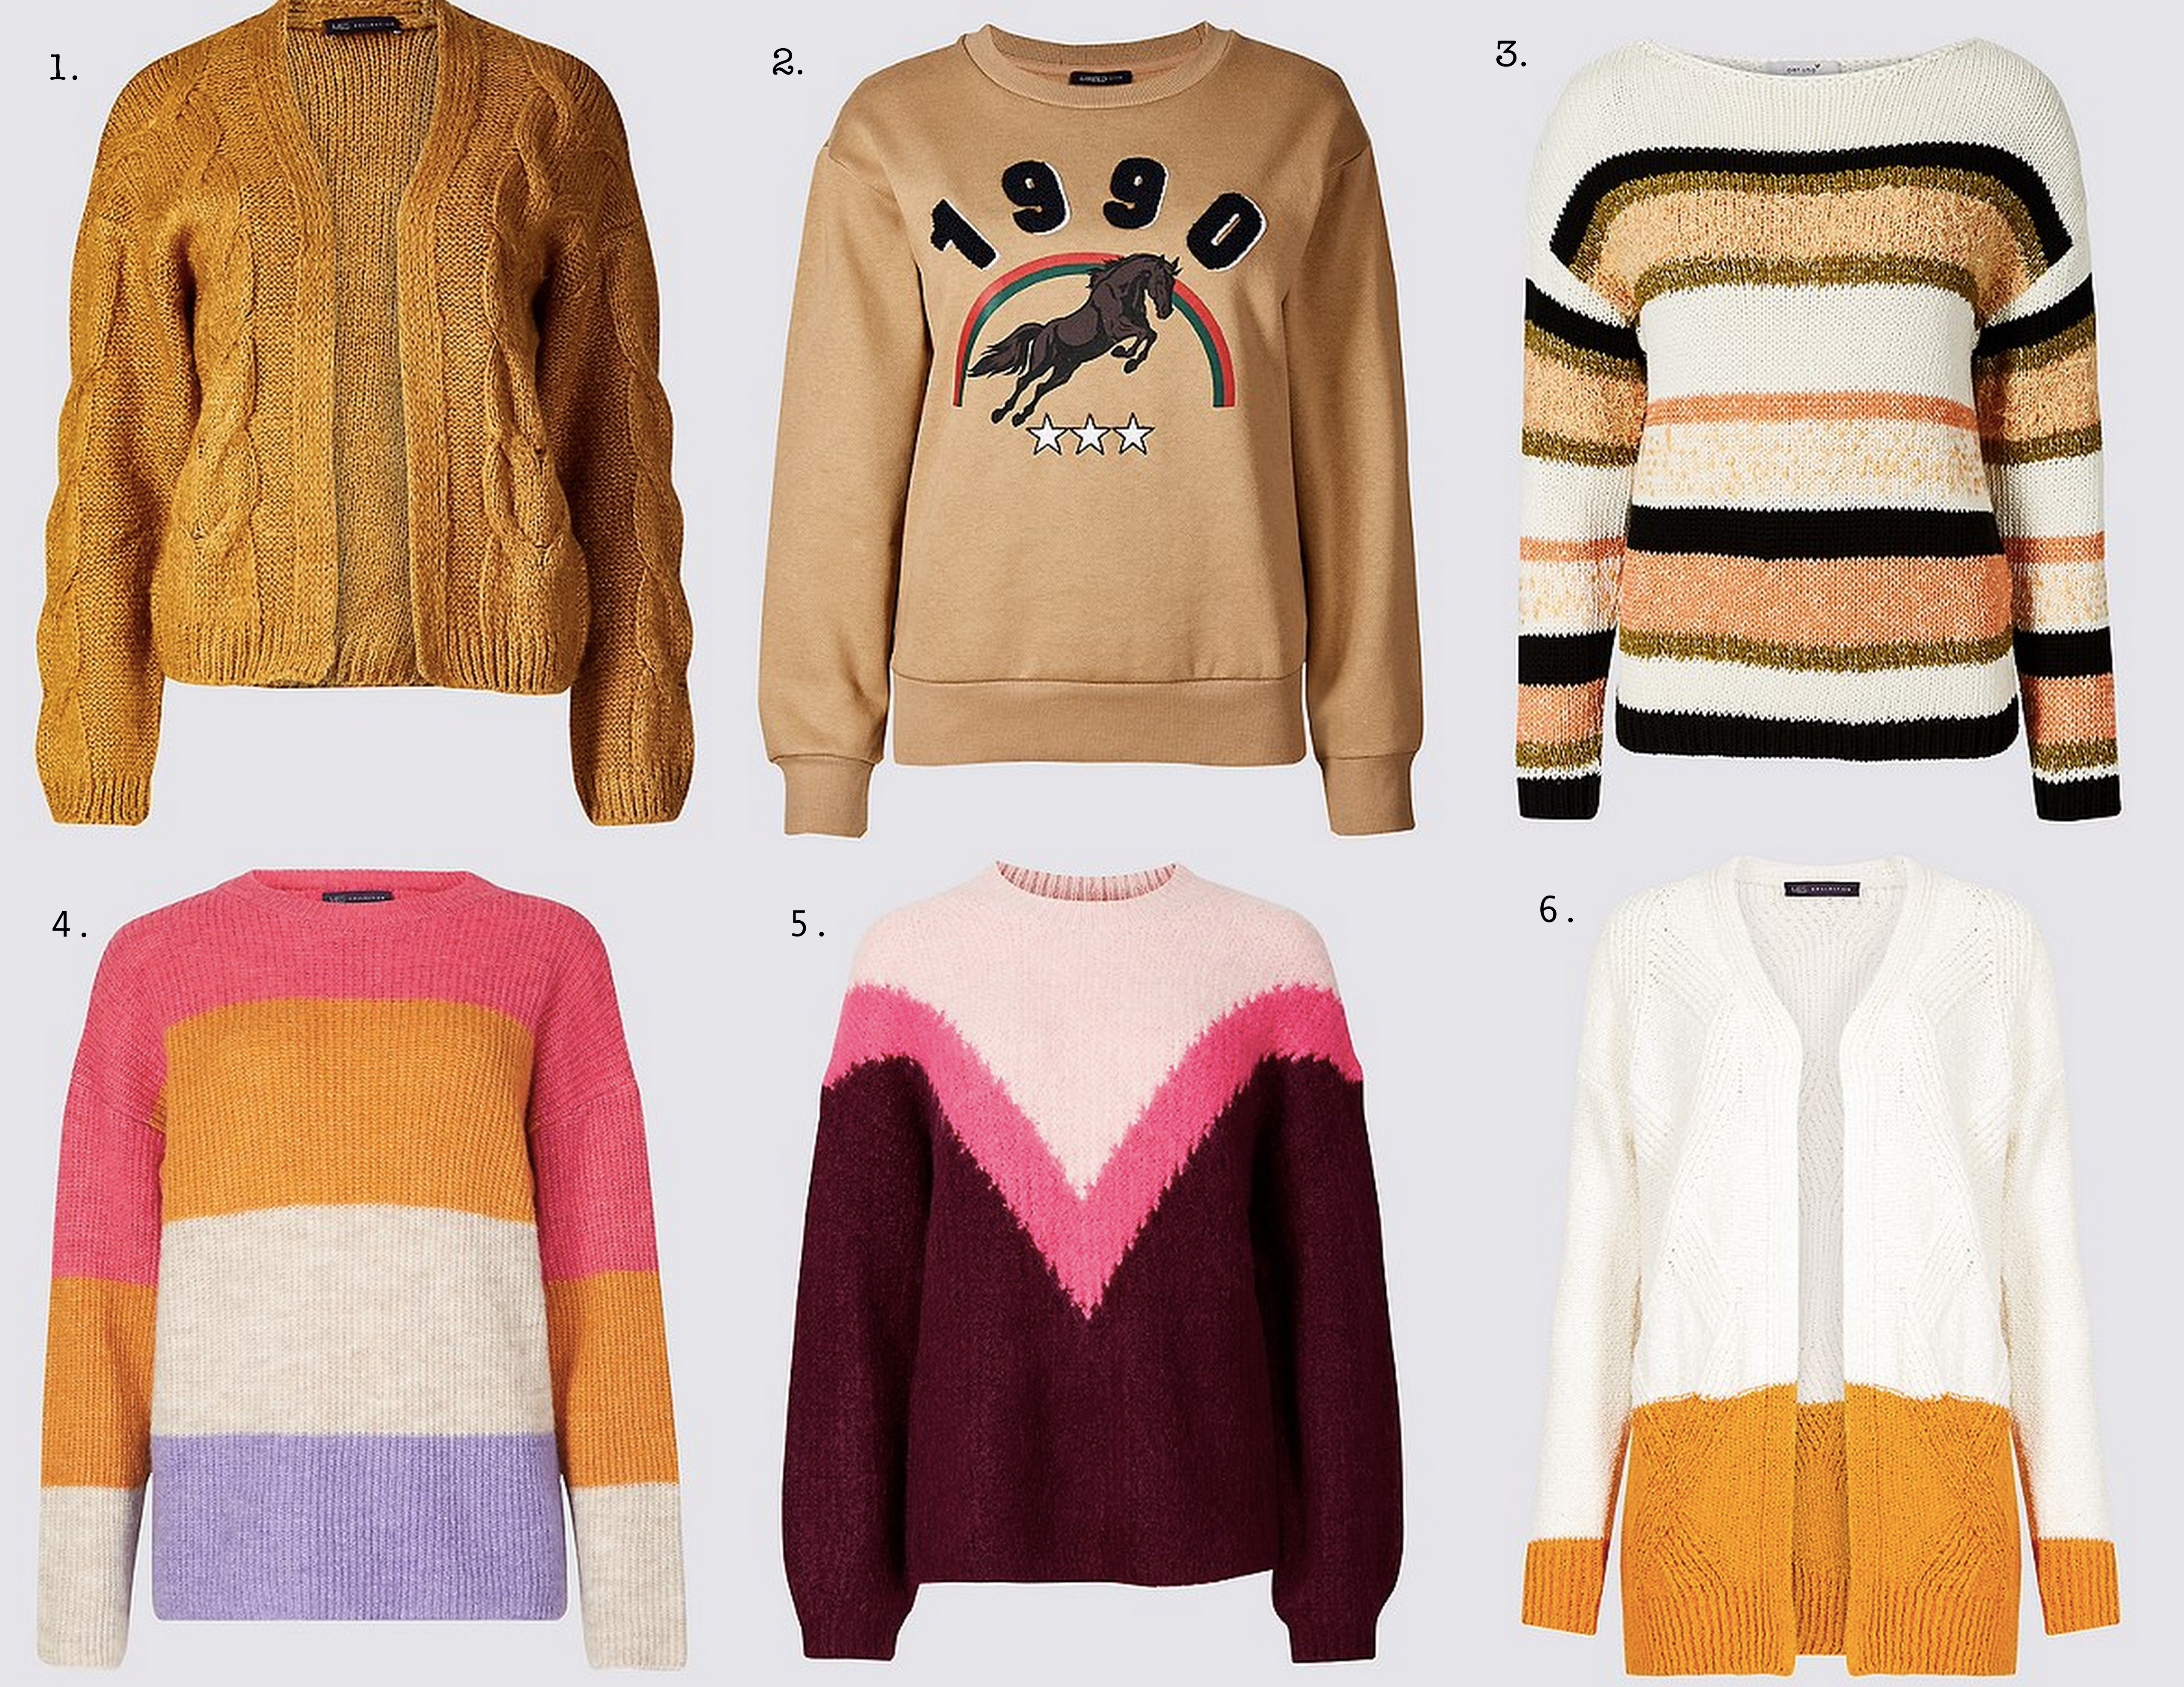 marks and spencer sweaters